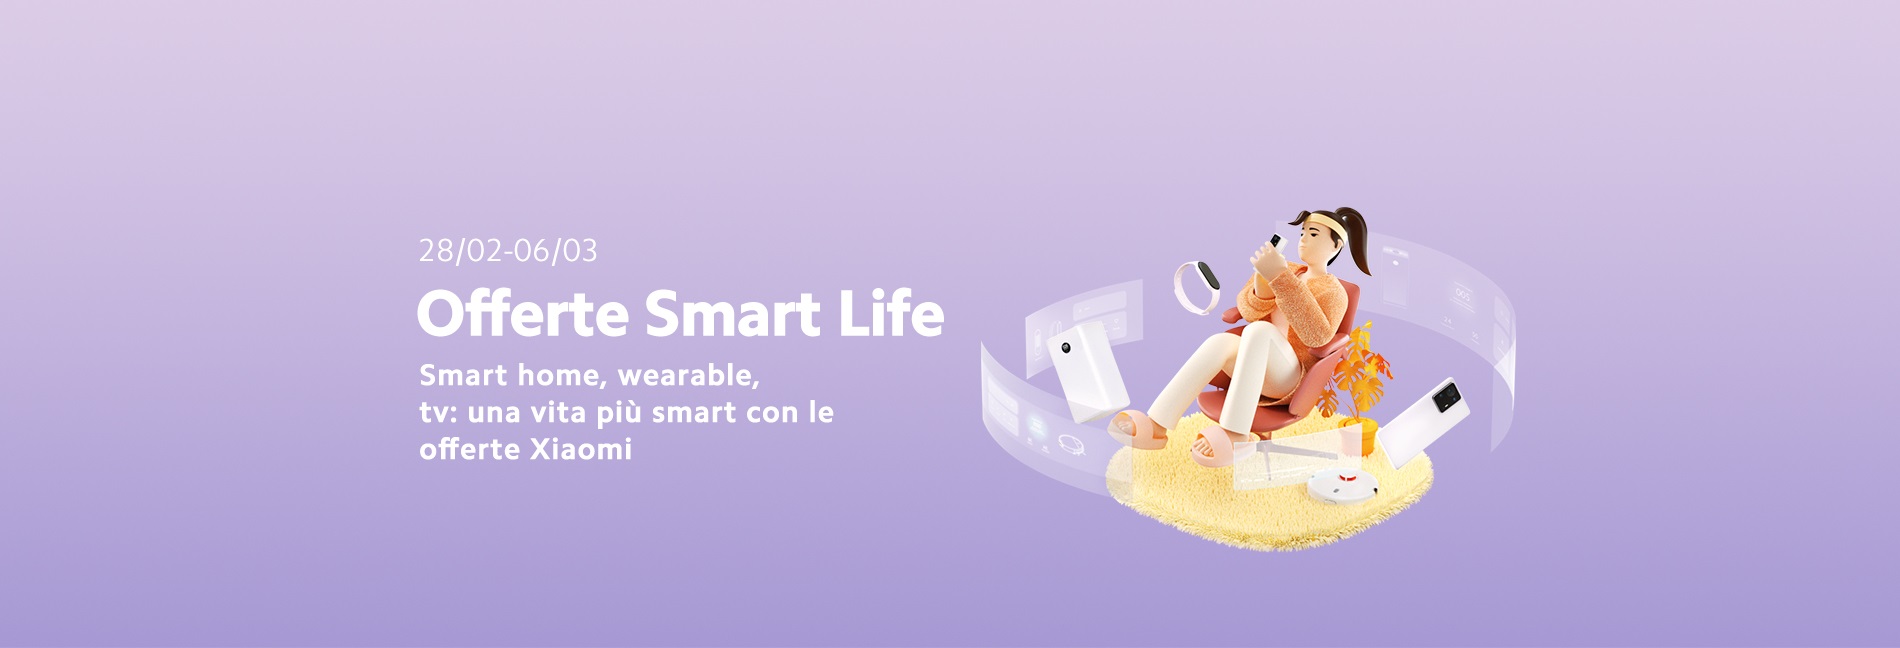 Xiaomi Smart Life Offers poster